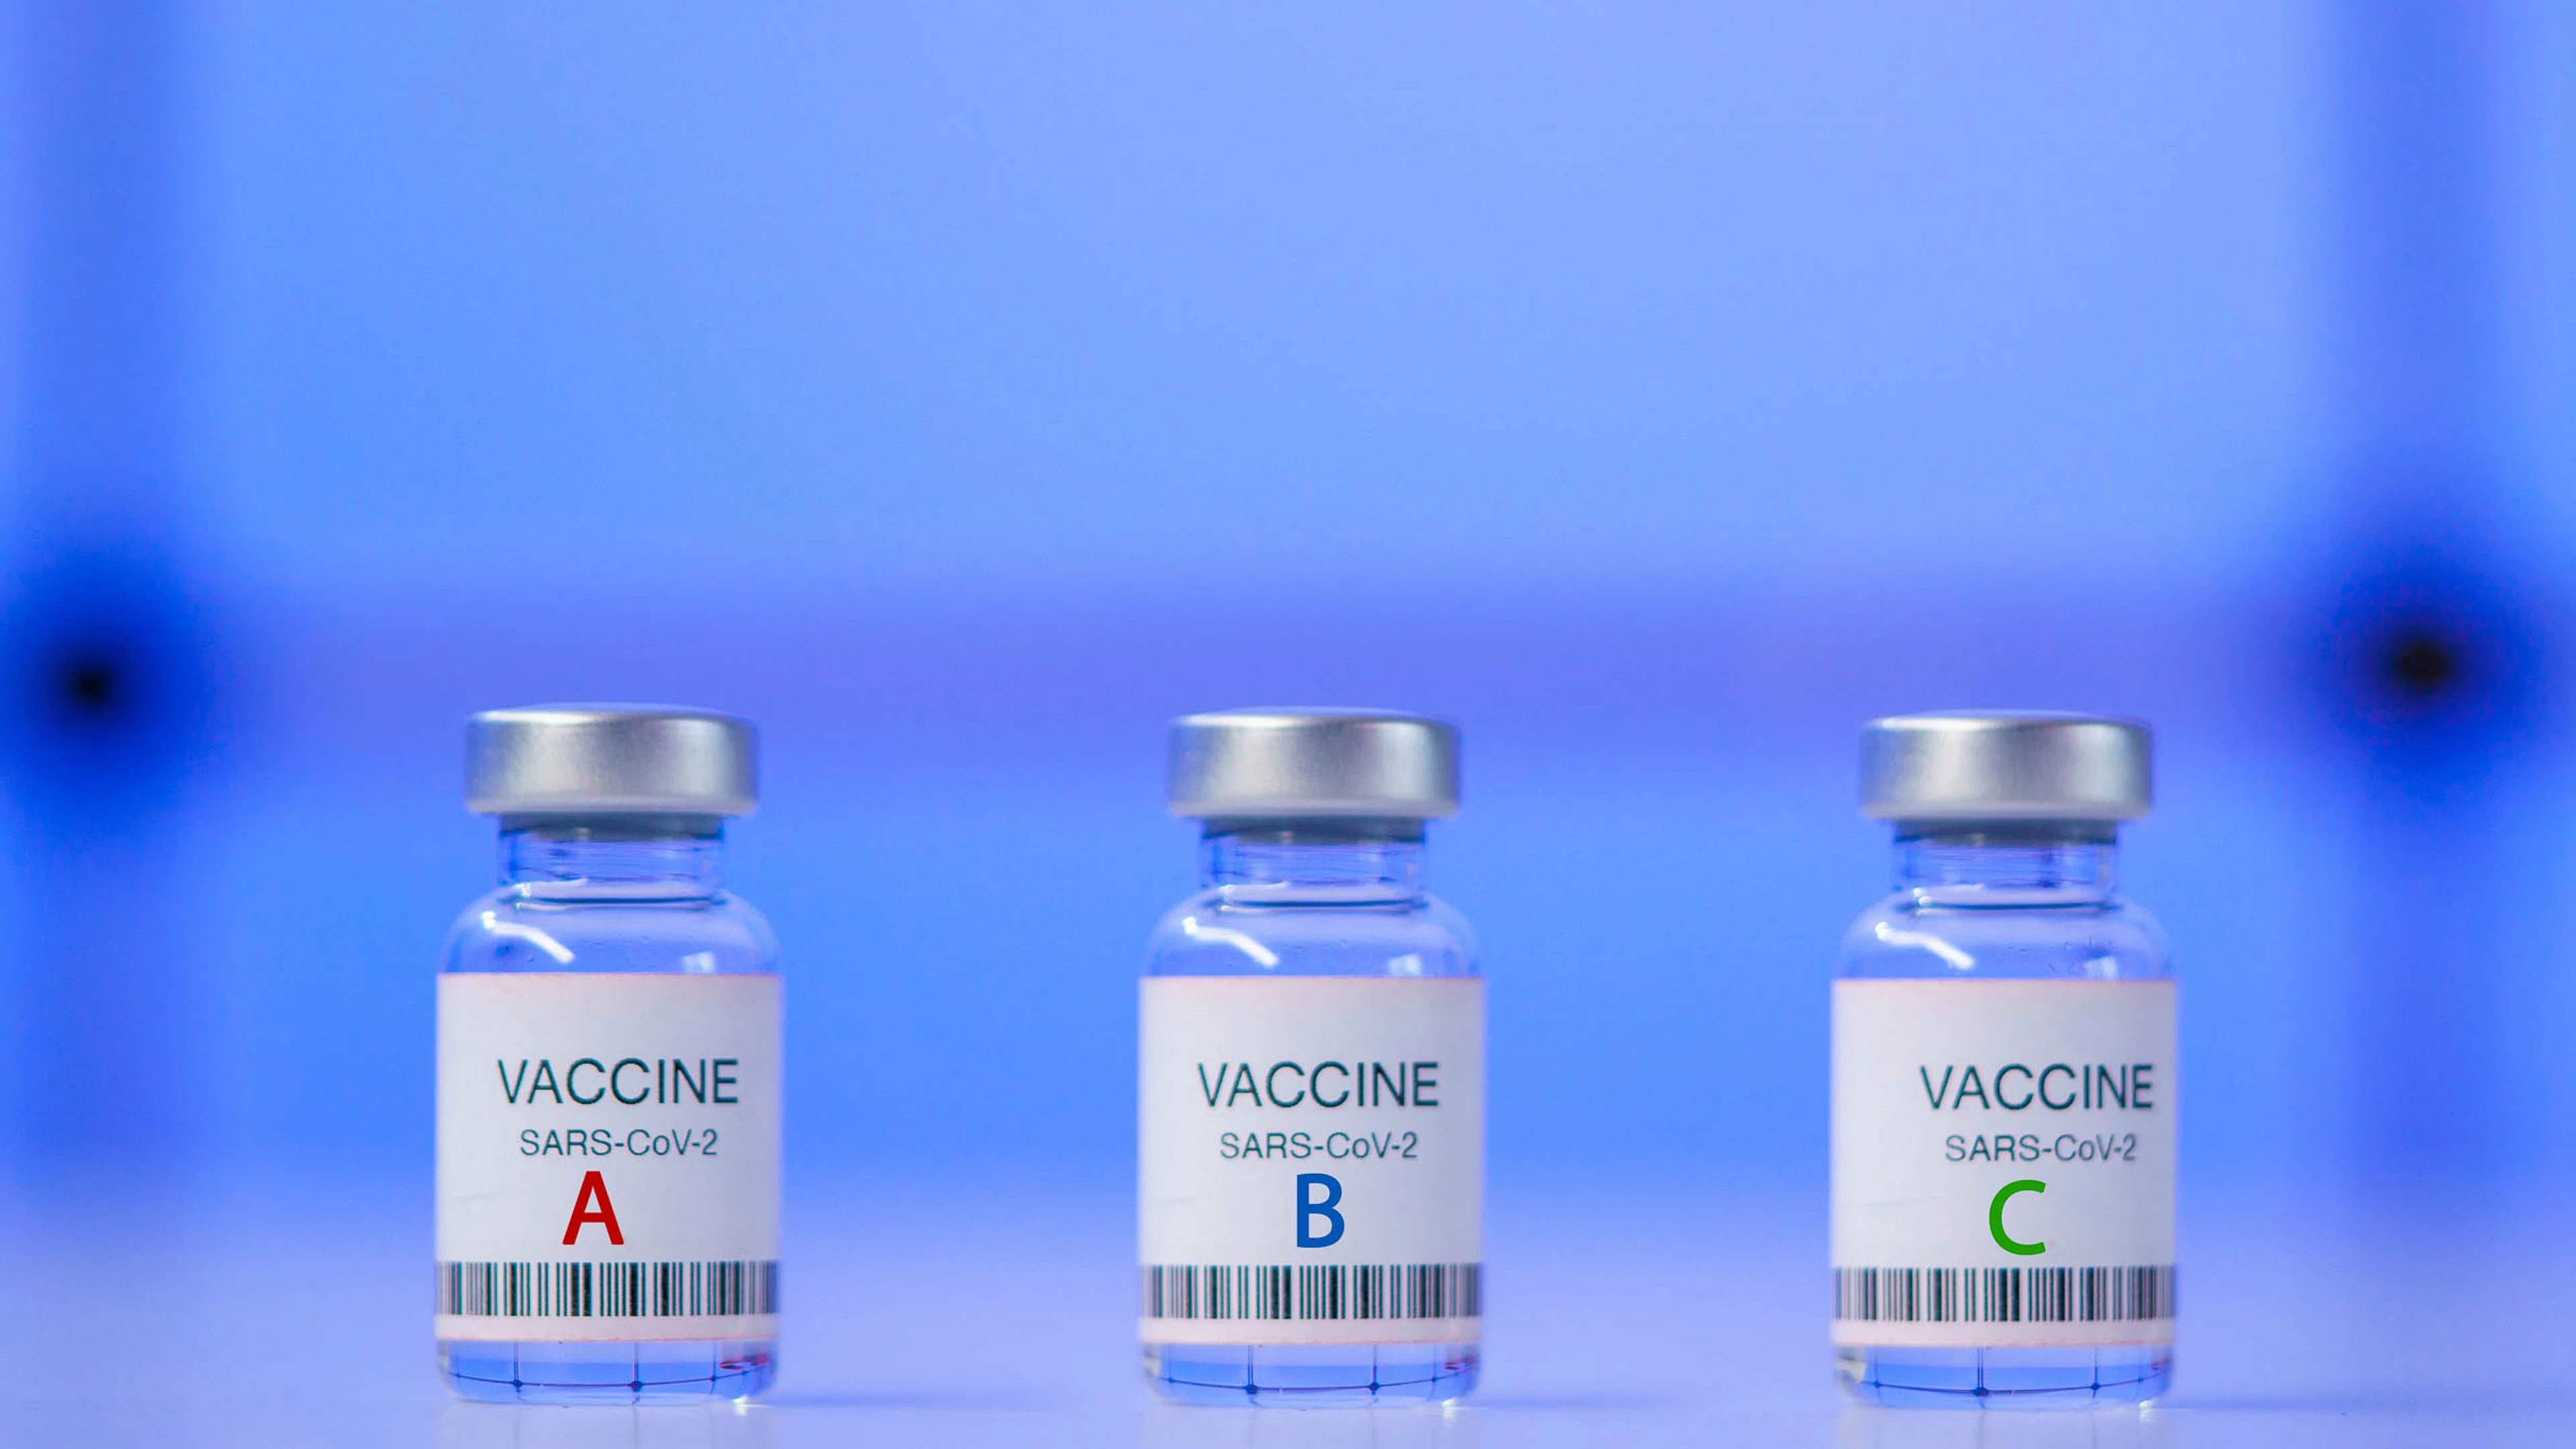 Choosing,And,Comparing,Coronavirus,Vaccines,From,Different,Manufacturers,And,Types.